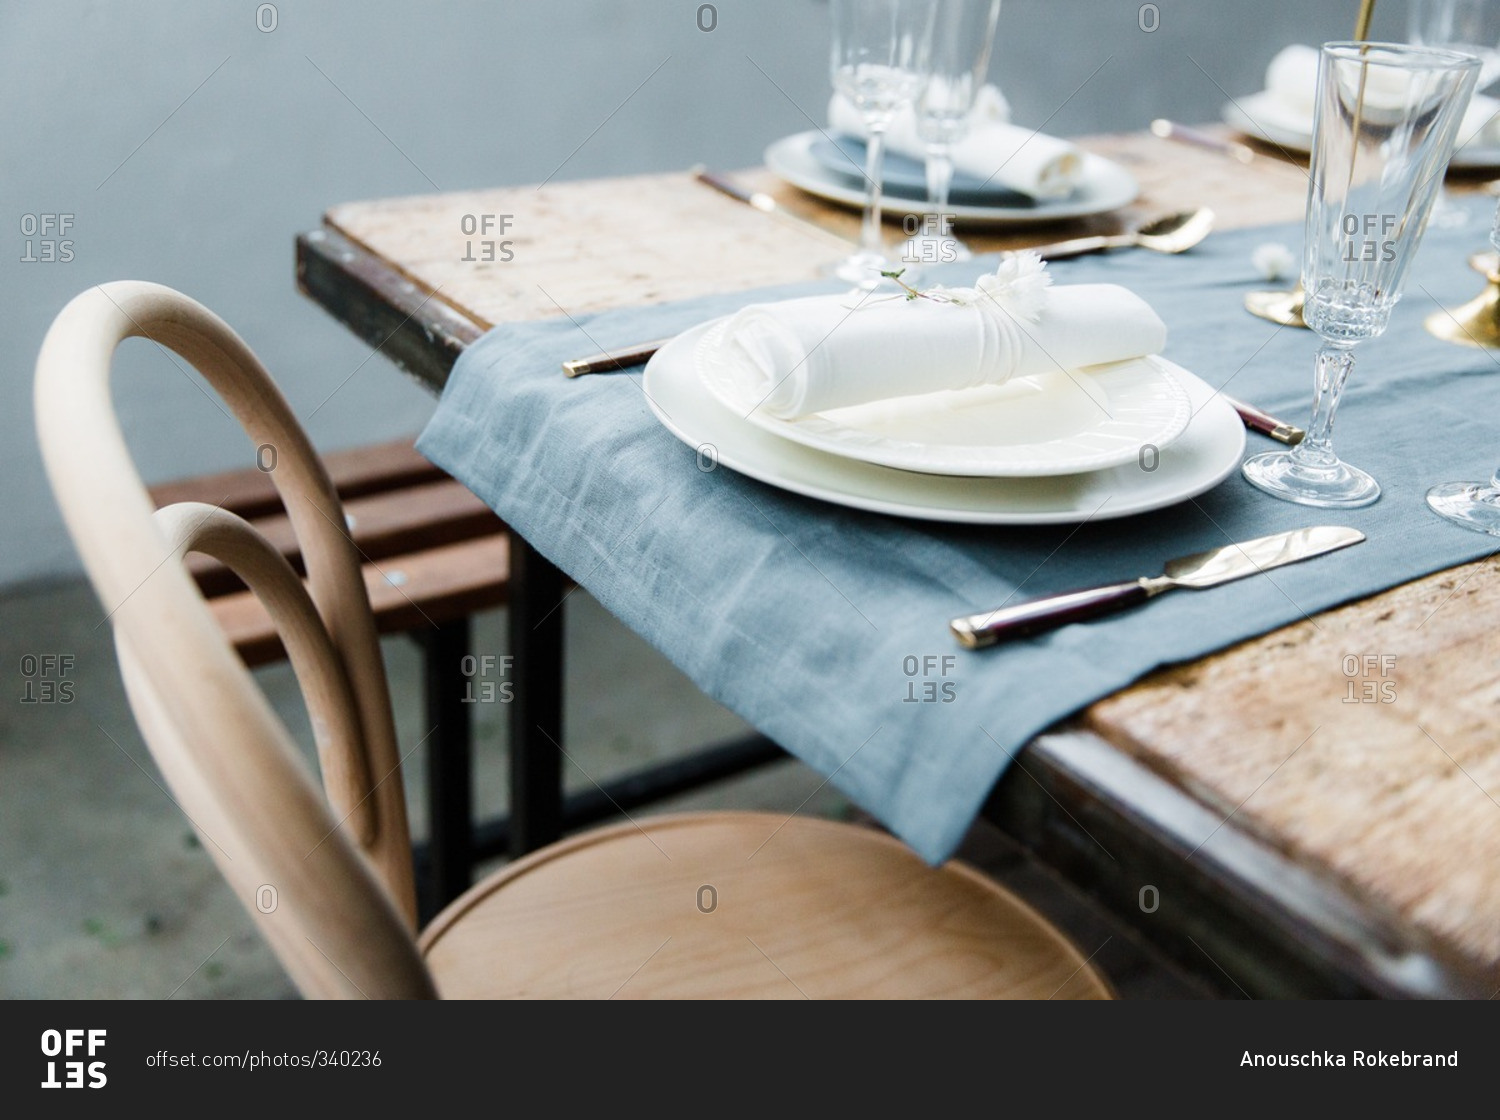 Wooden chair and table with blue linen runner and cream coloured plates